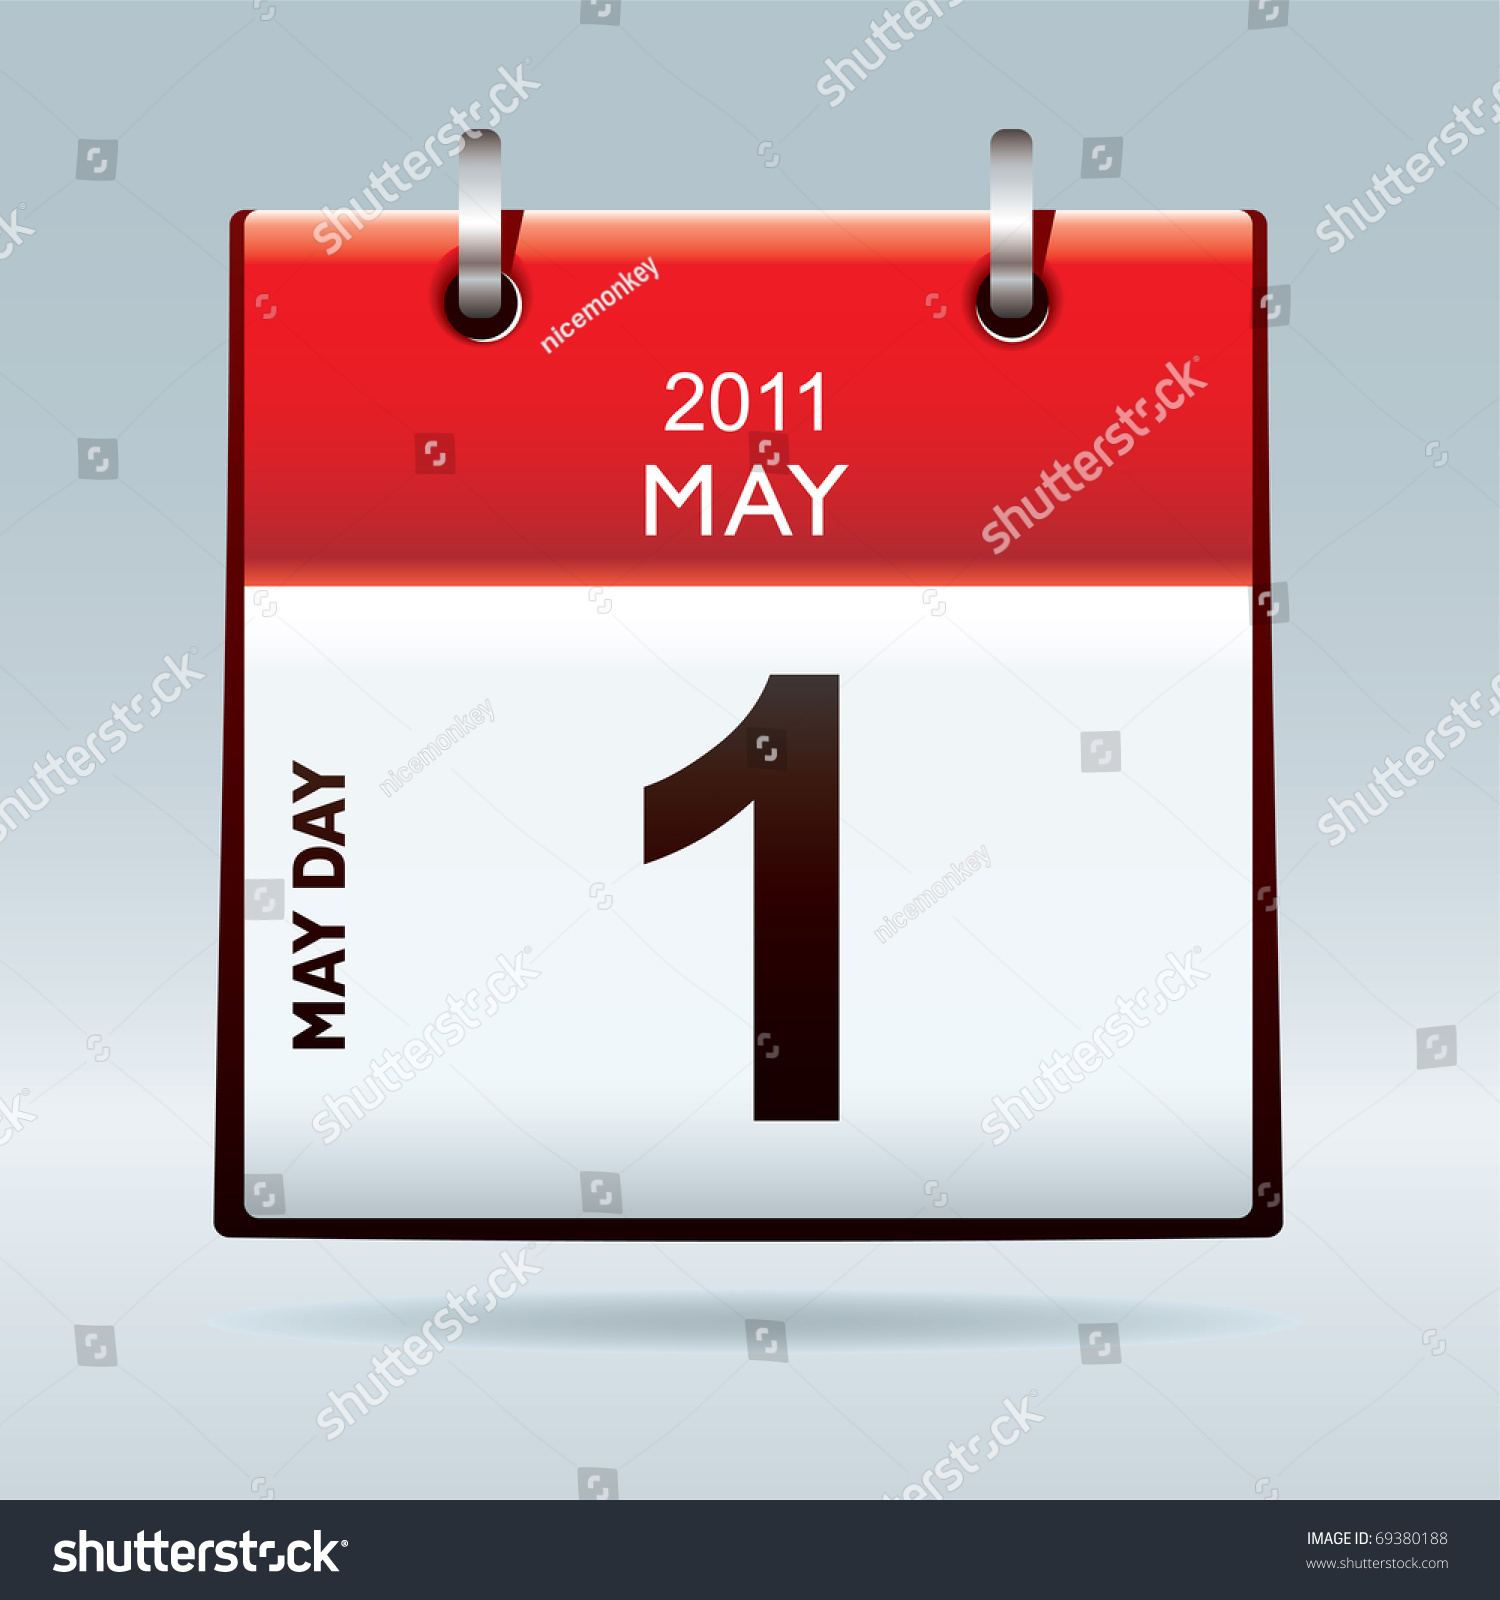 May Day Calendar Icon With Red Banner Top And Blue Background Stock